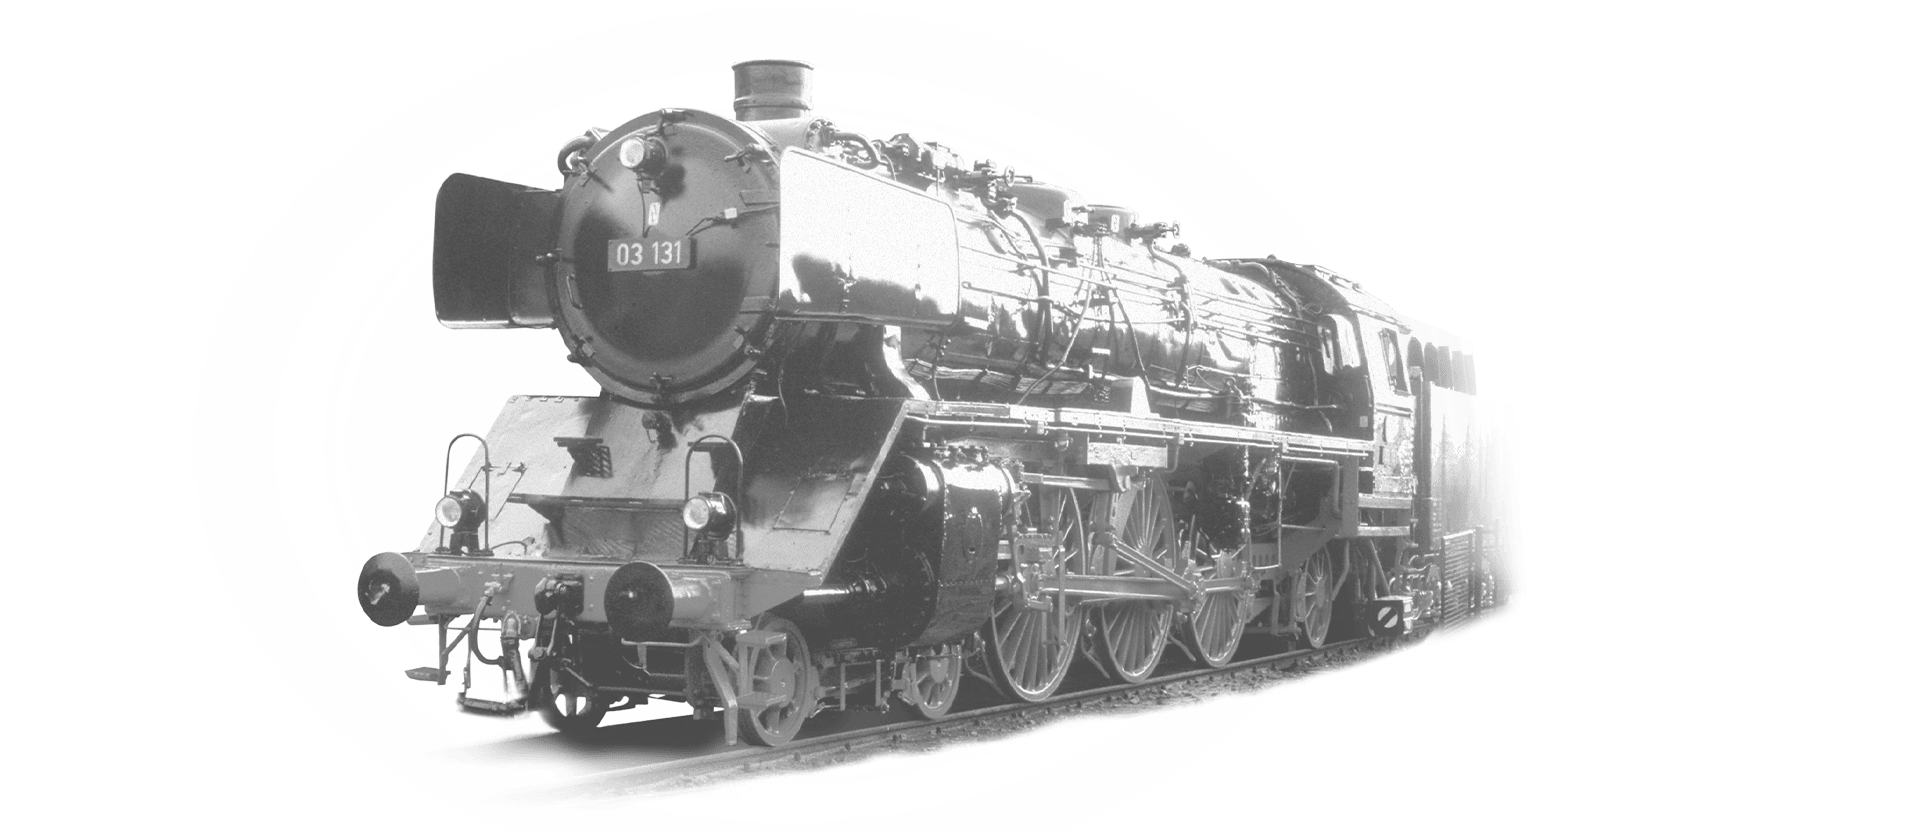 The locomotive 03-131 is coming towards the camera in black and white